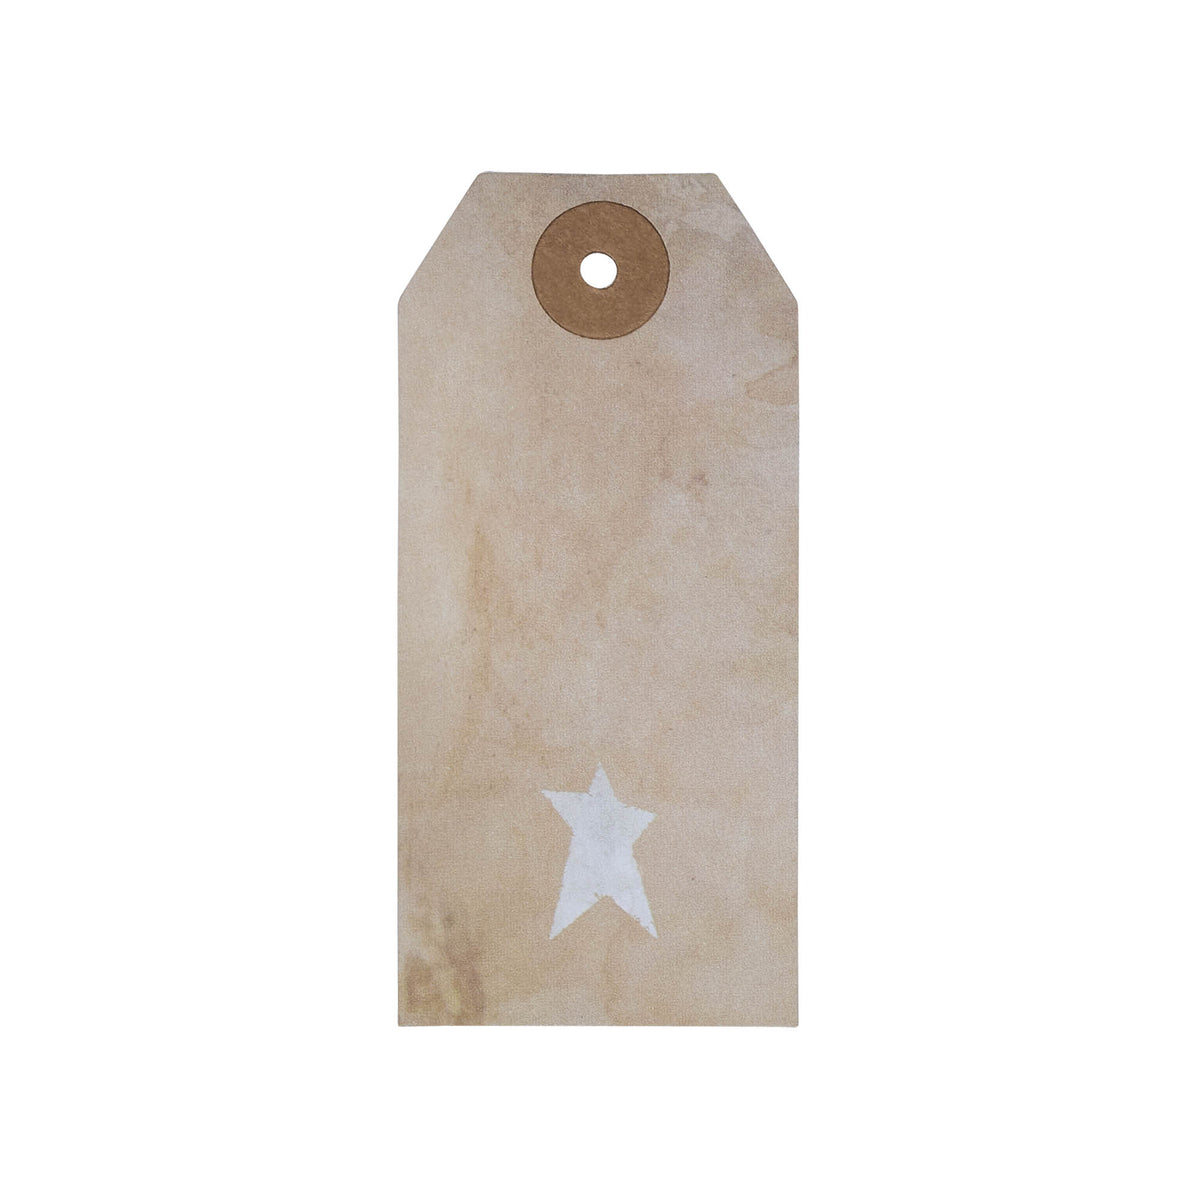 Primitive Star Tea Stained Paper Tag Creme 3.75x1.75 w/ Twine Set of 50